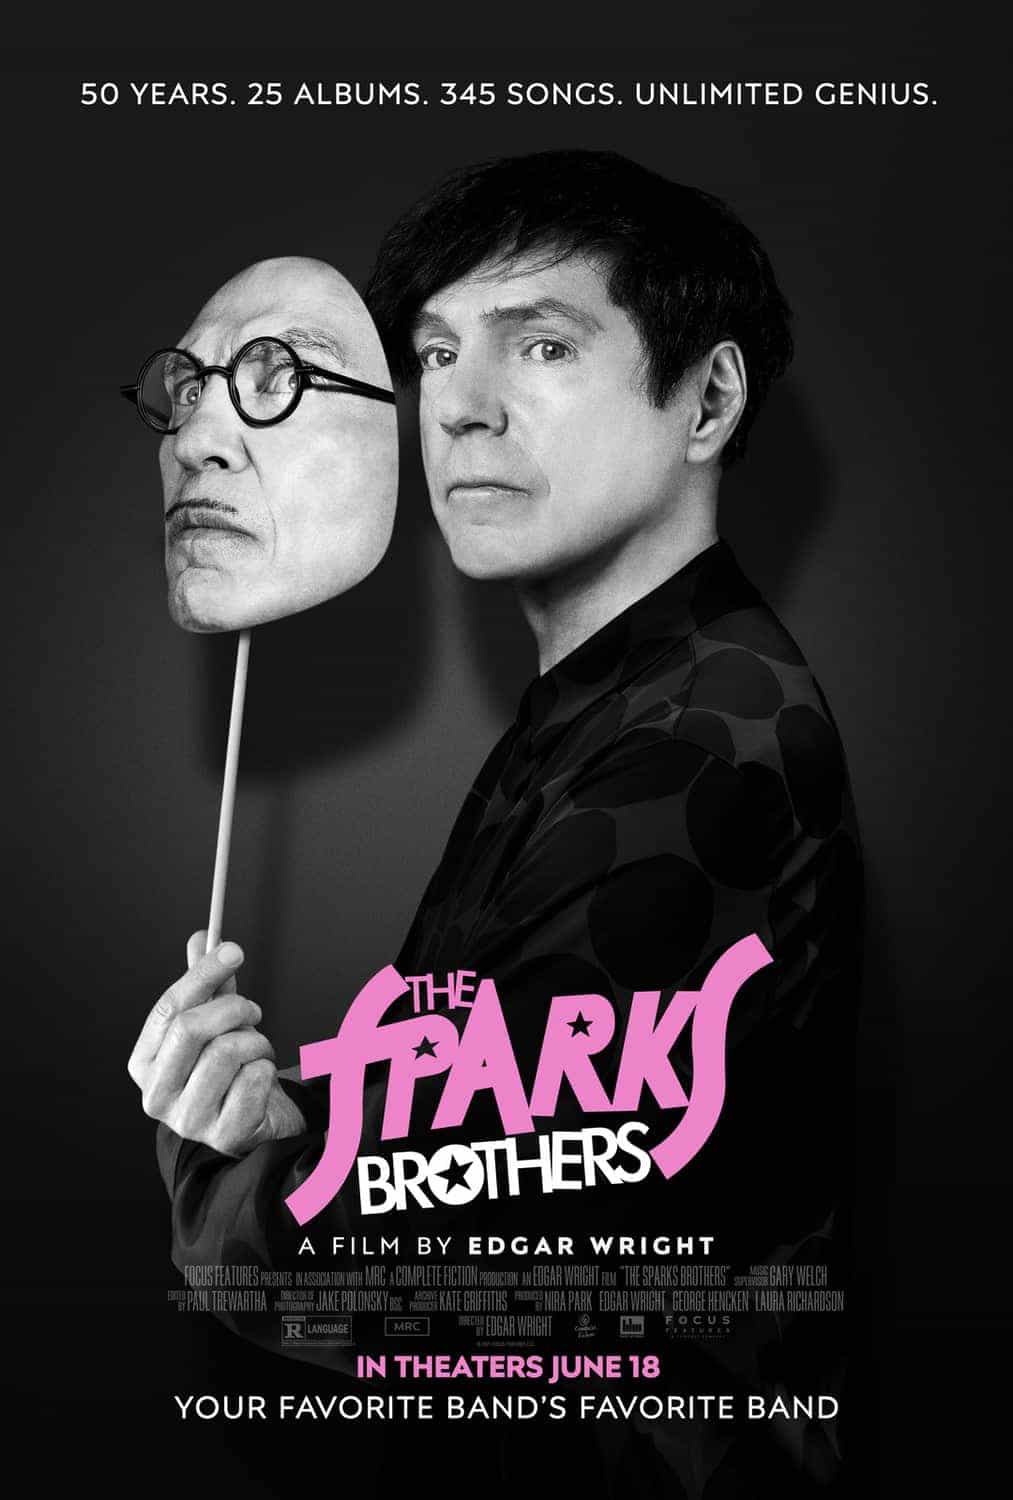 The Sparks Brother